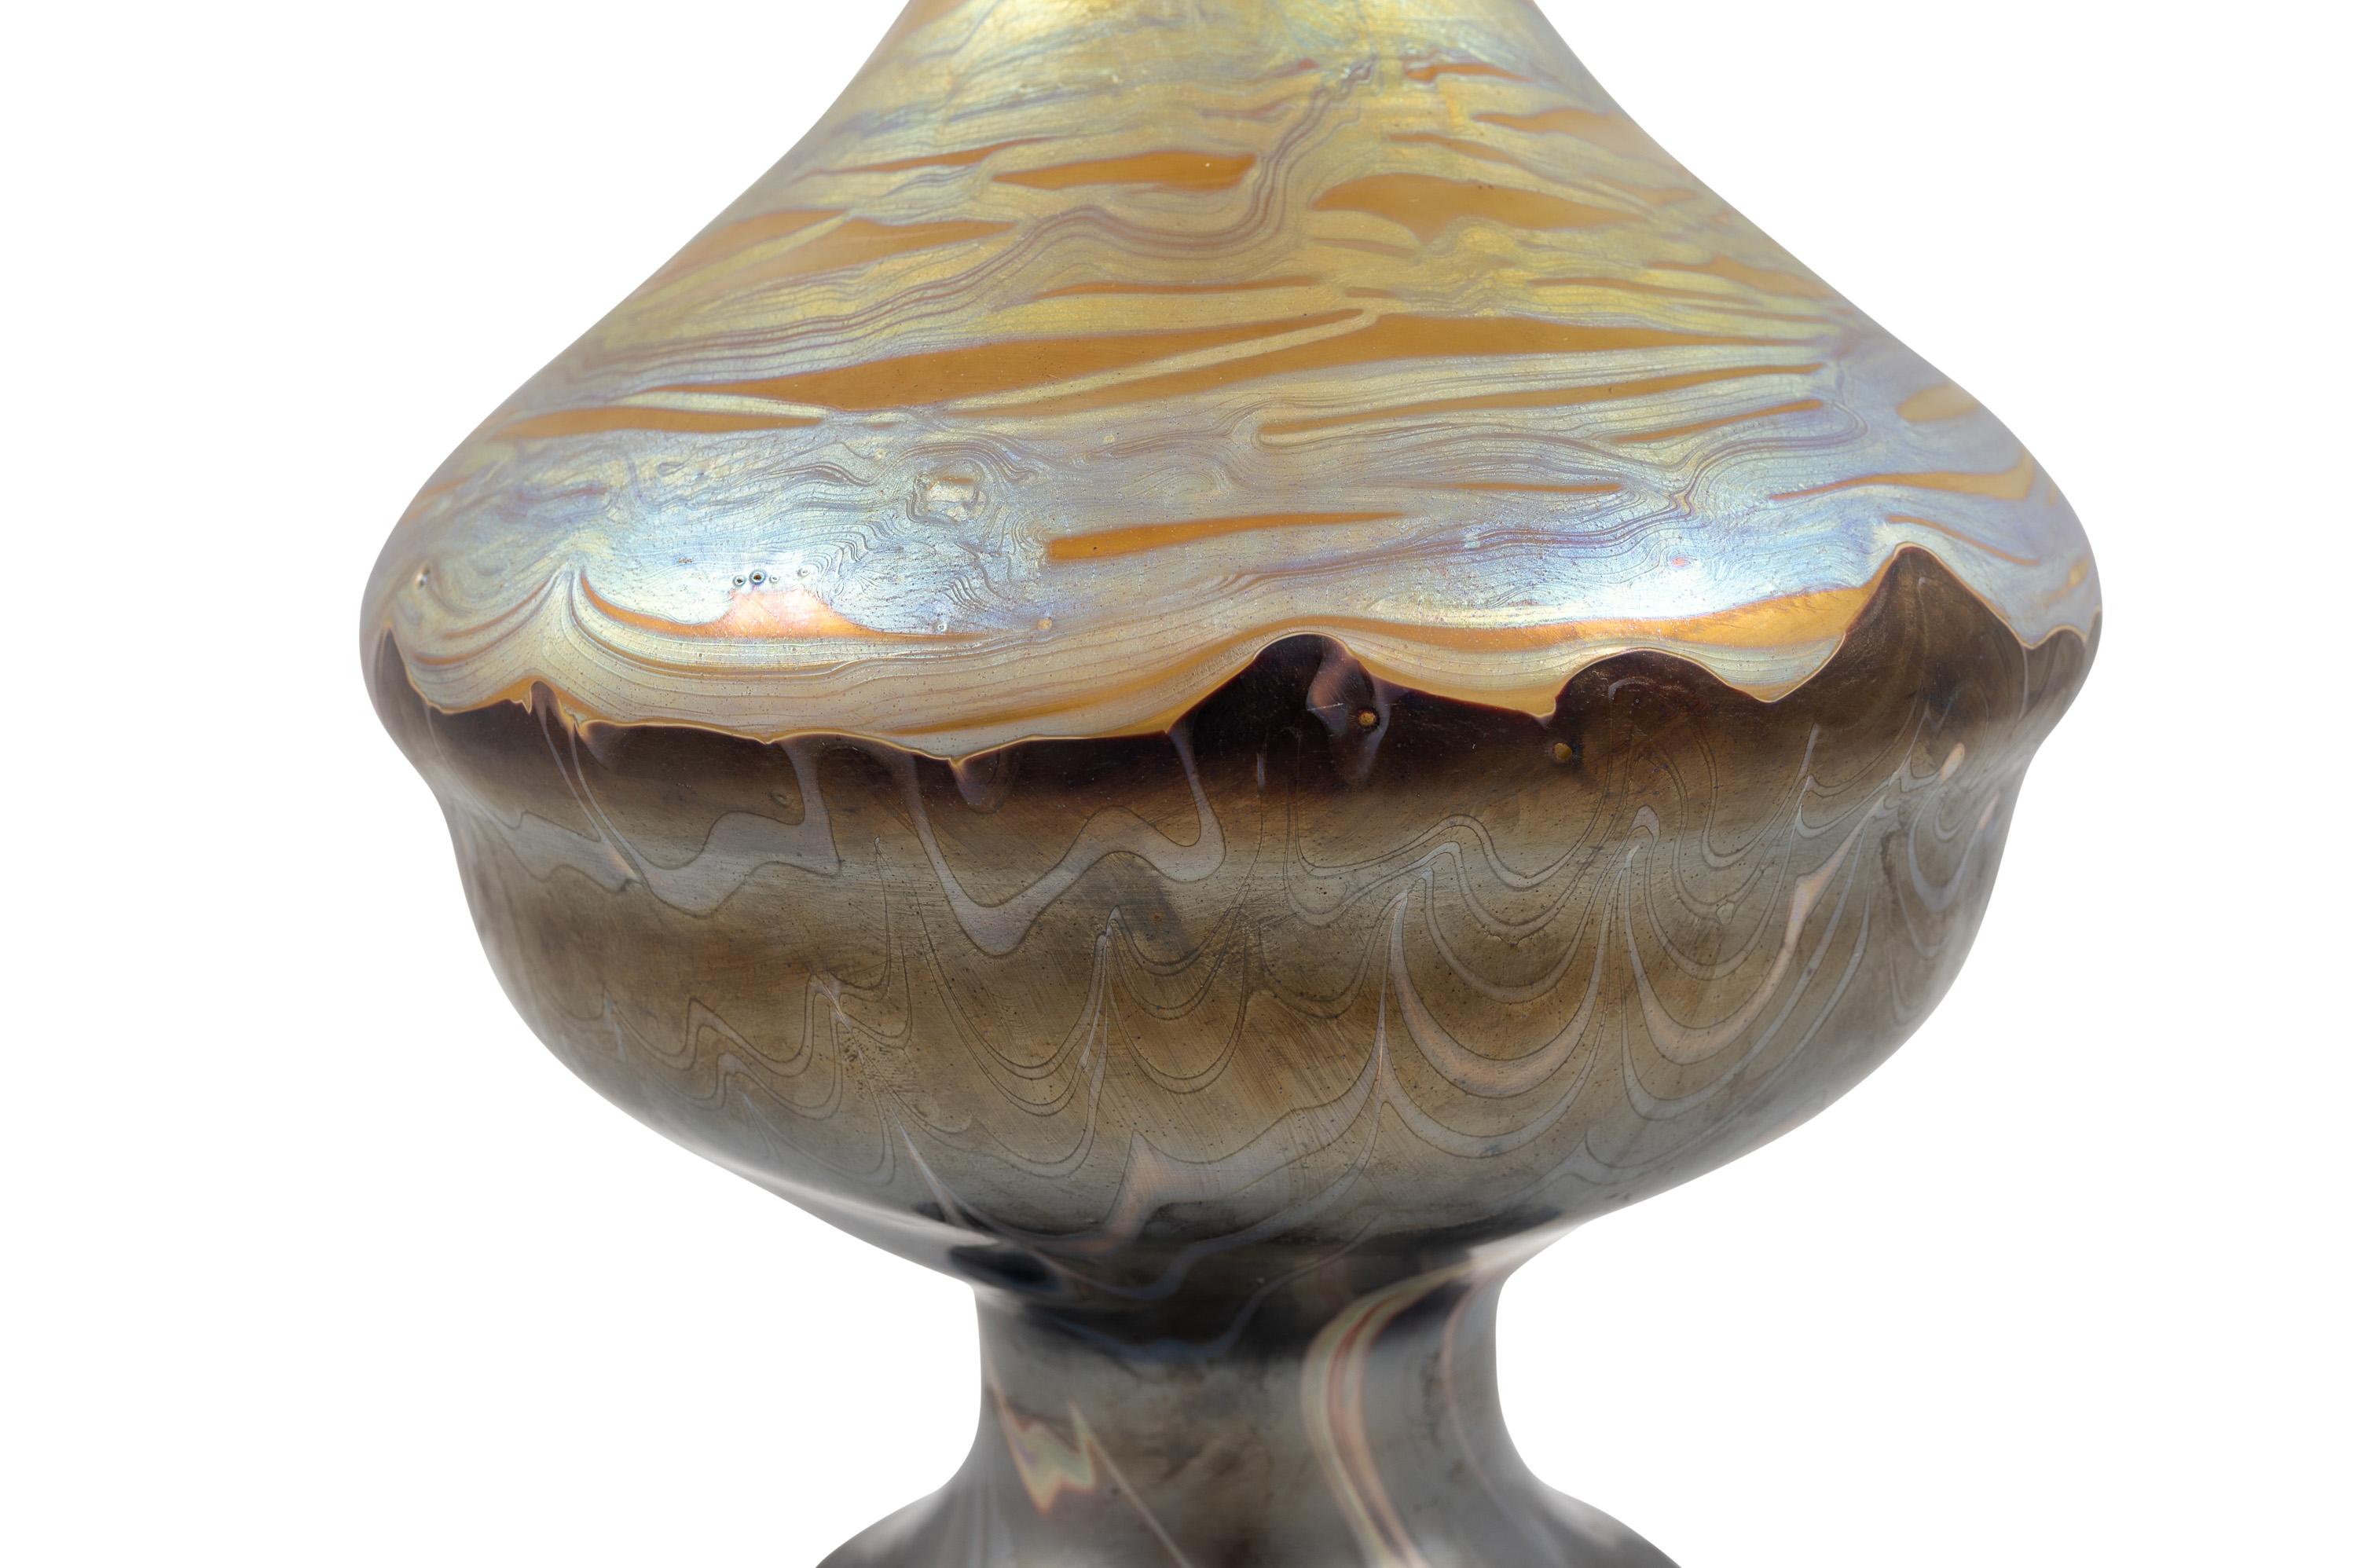 Large Bohemian Glass Vase Loetz PG 387 decoration ca. 1900 Orange Brown Gold  In Good Condition For Sale In Klosterneuburg, AT